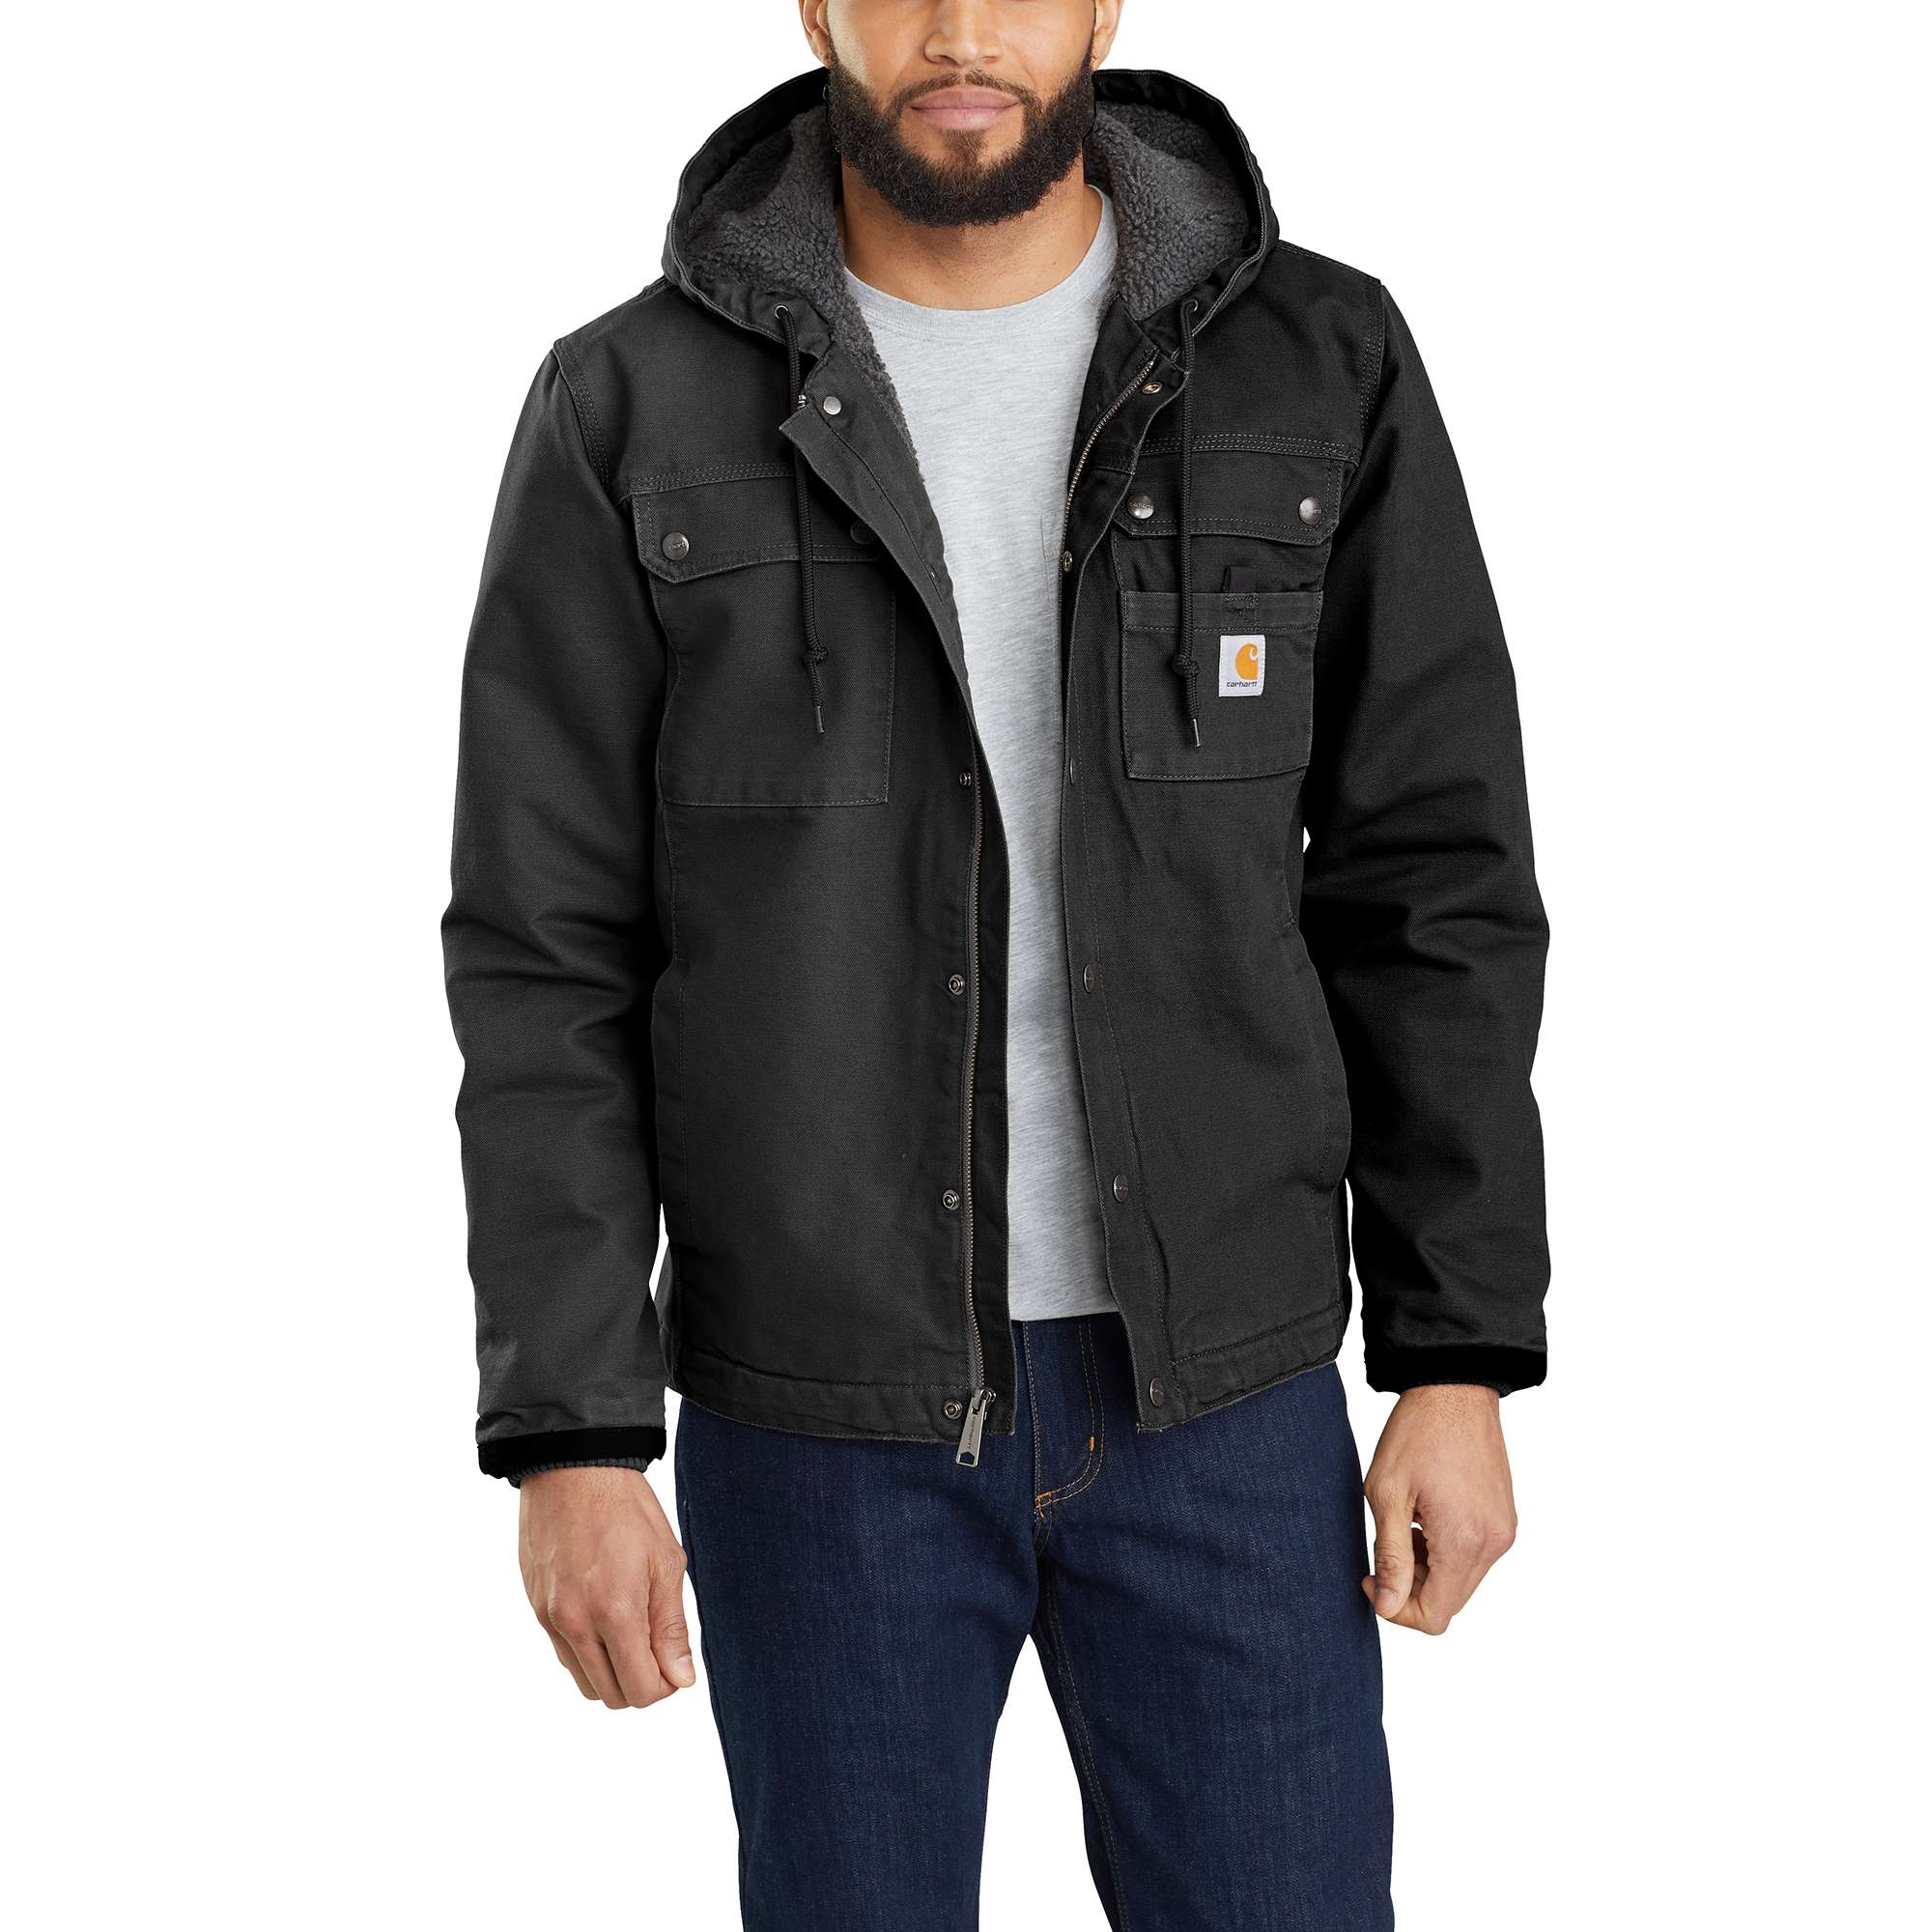 Men's Sherpa-Lined Utility Jacket - Relaxed Fit Washed Duck